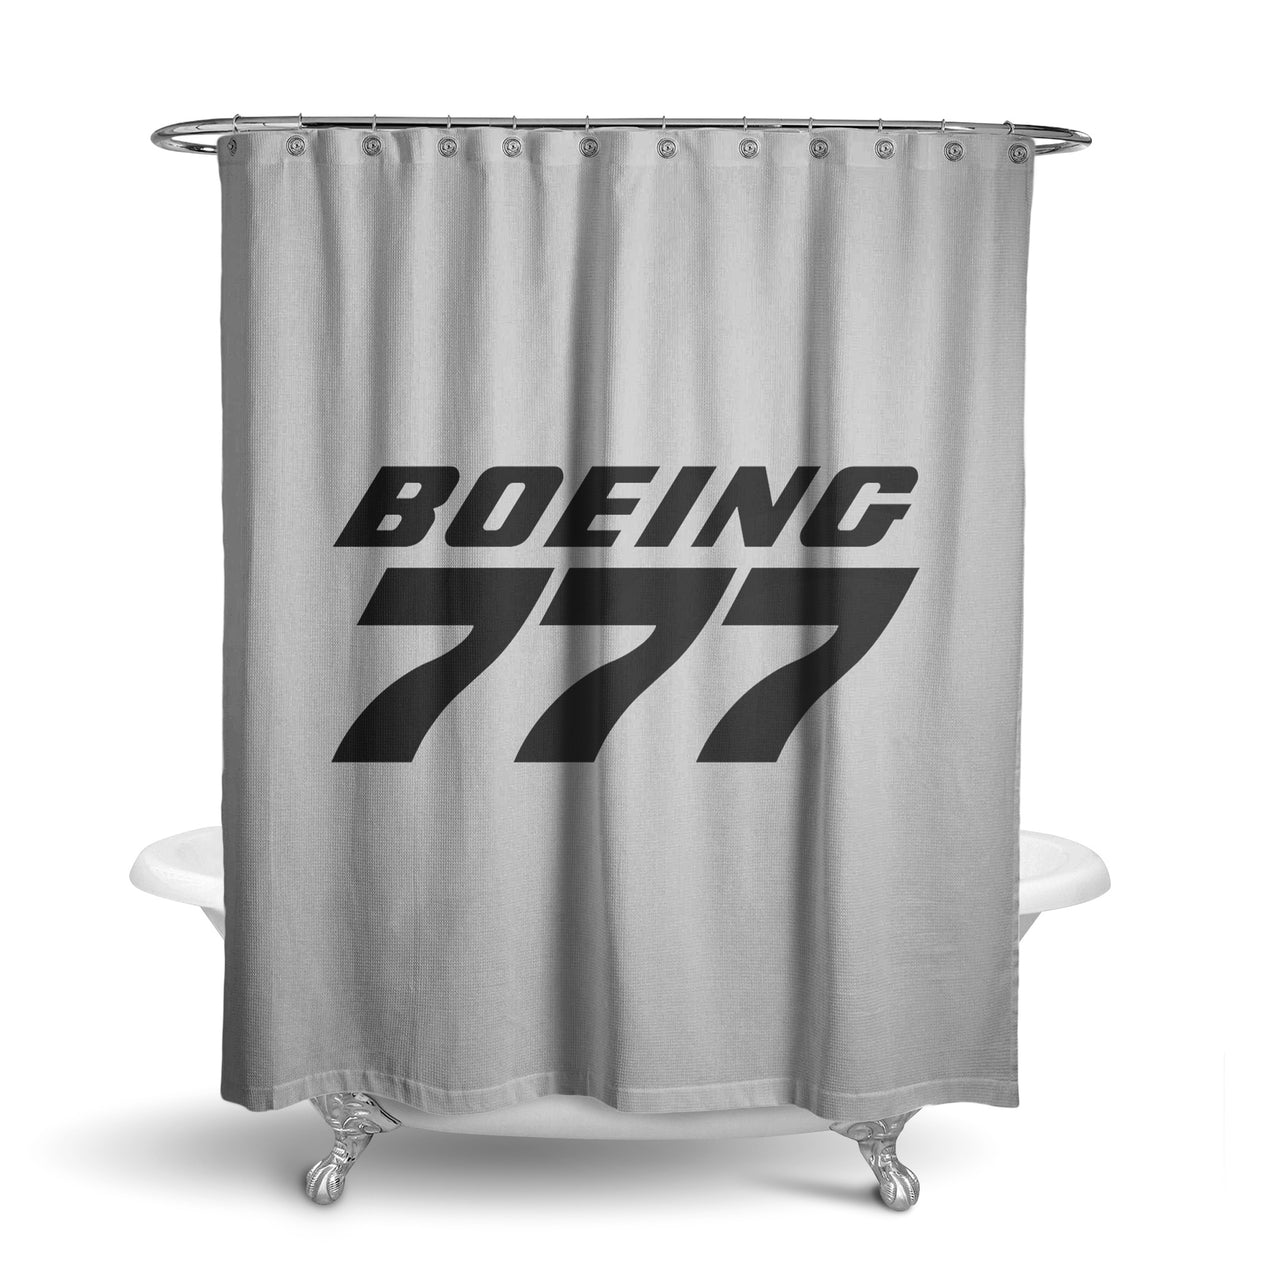 Boeing 777 & Text Designed Shower Curtains